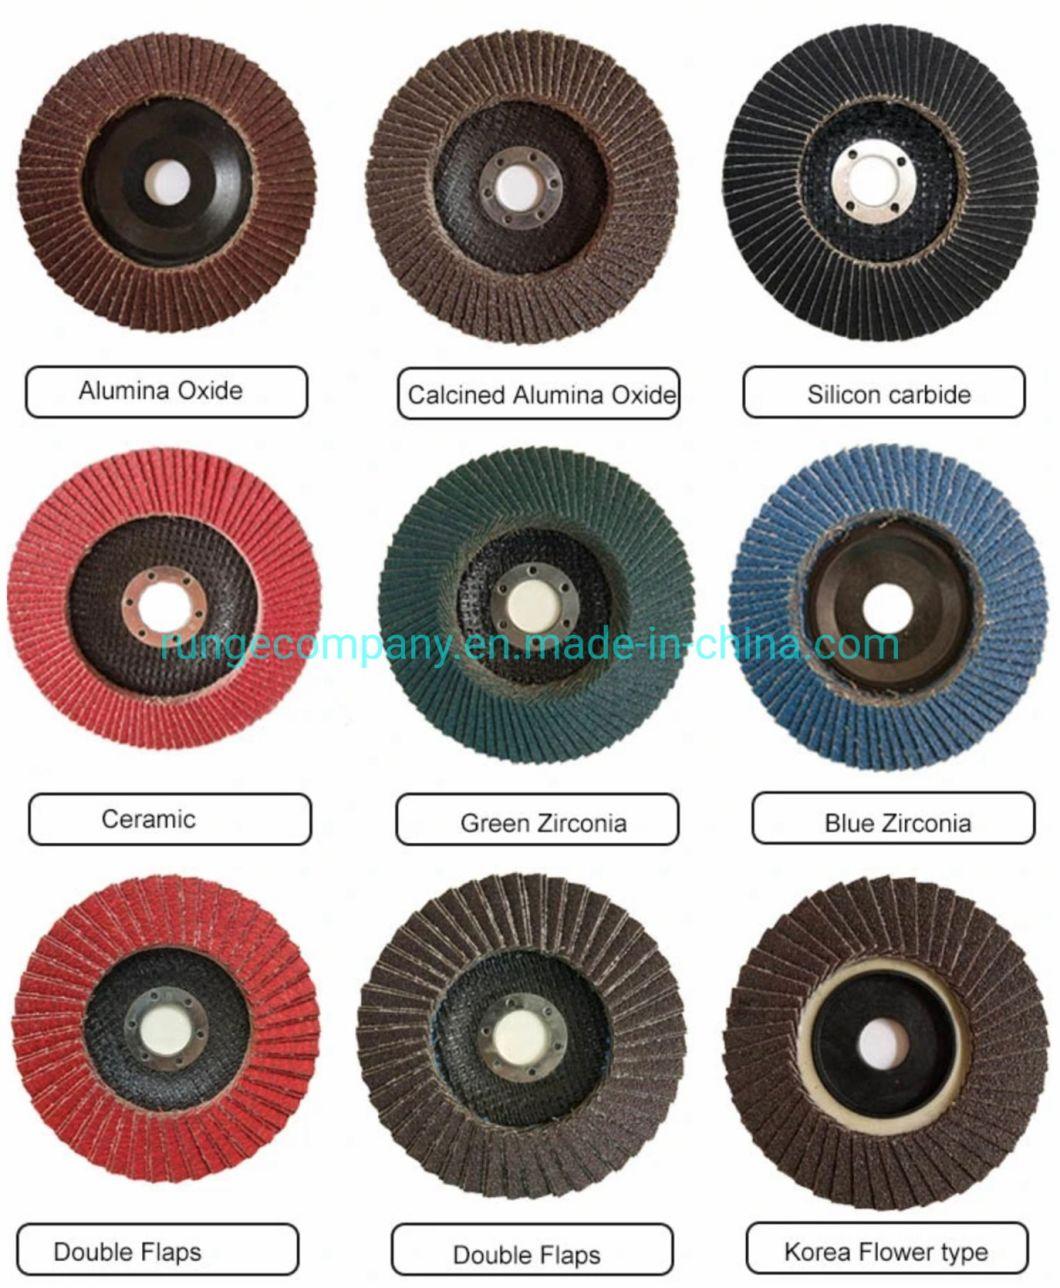 Power Tool Abrasive Zirconia Flap Discs 40 Grit 4-1/2 Inch for Grinding, Blending, Smooth Finishing